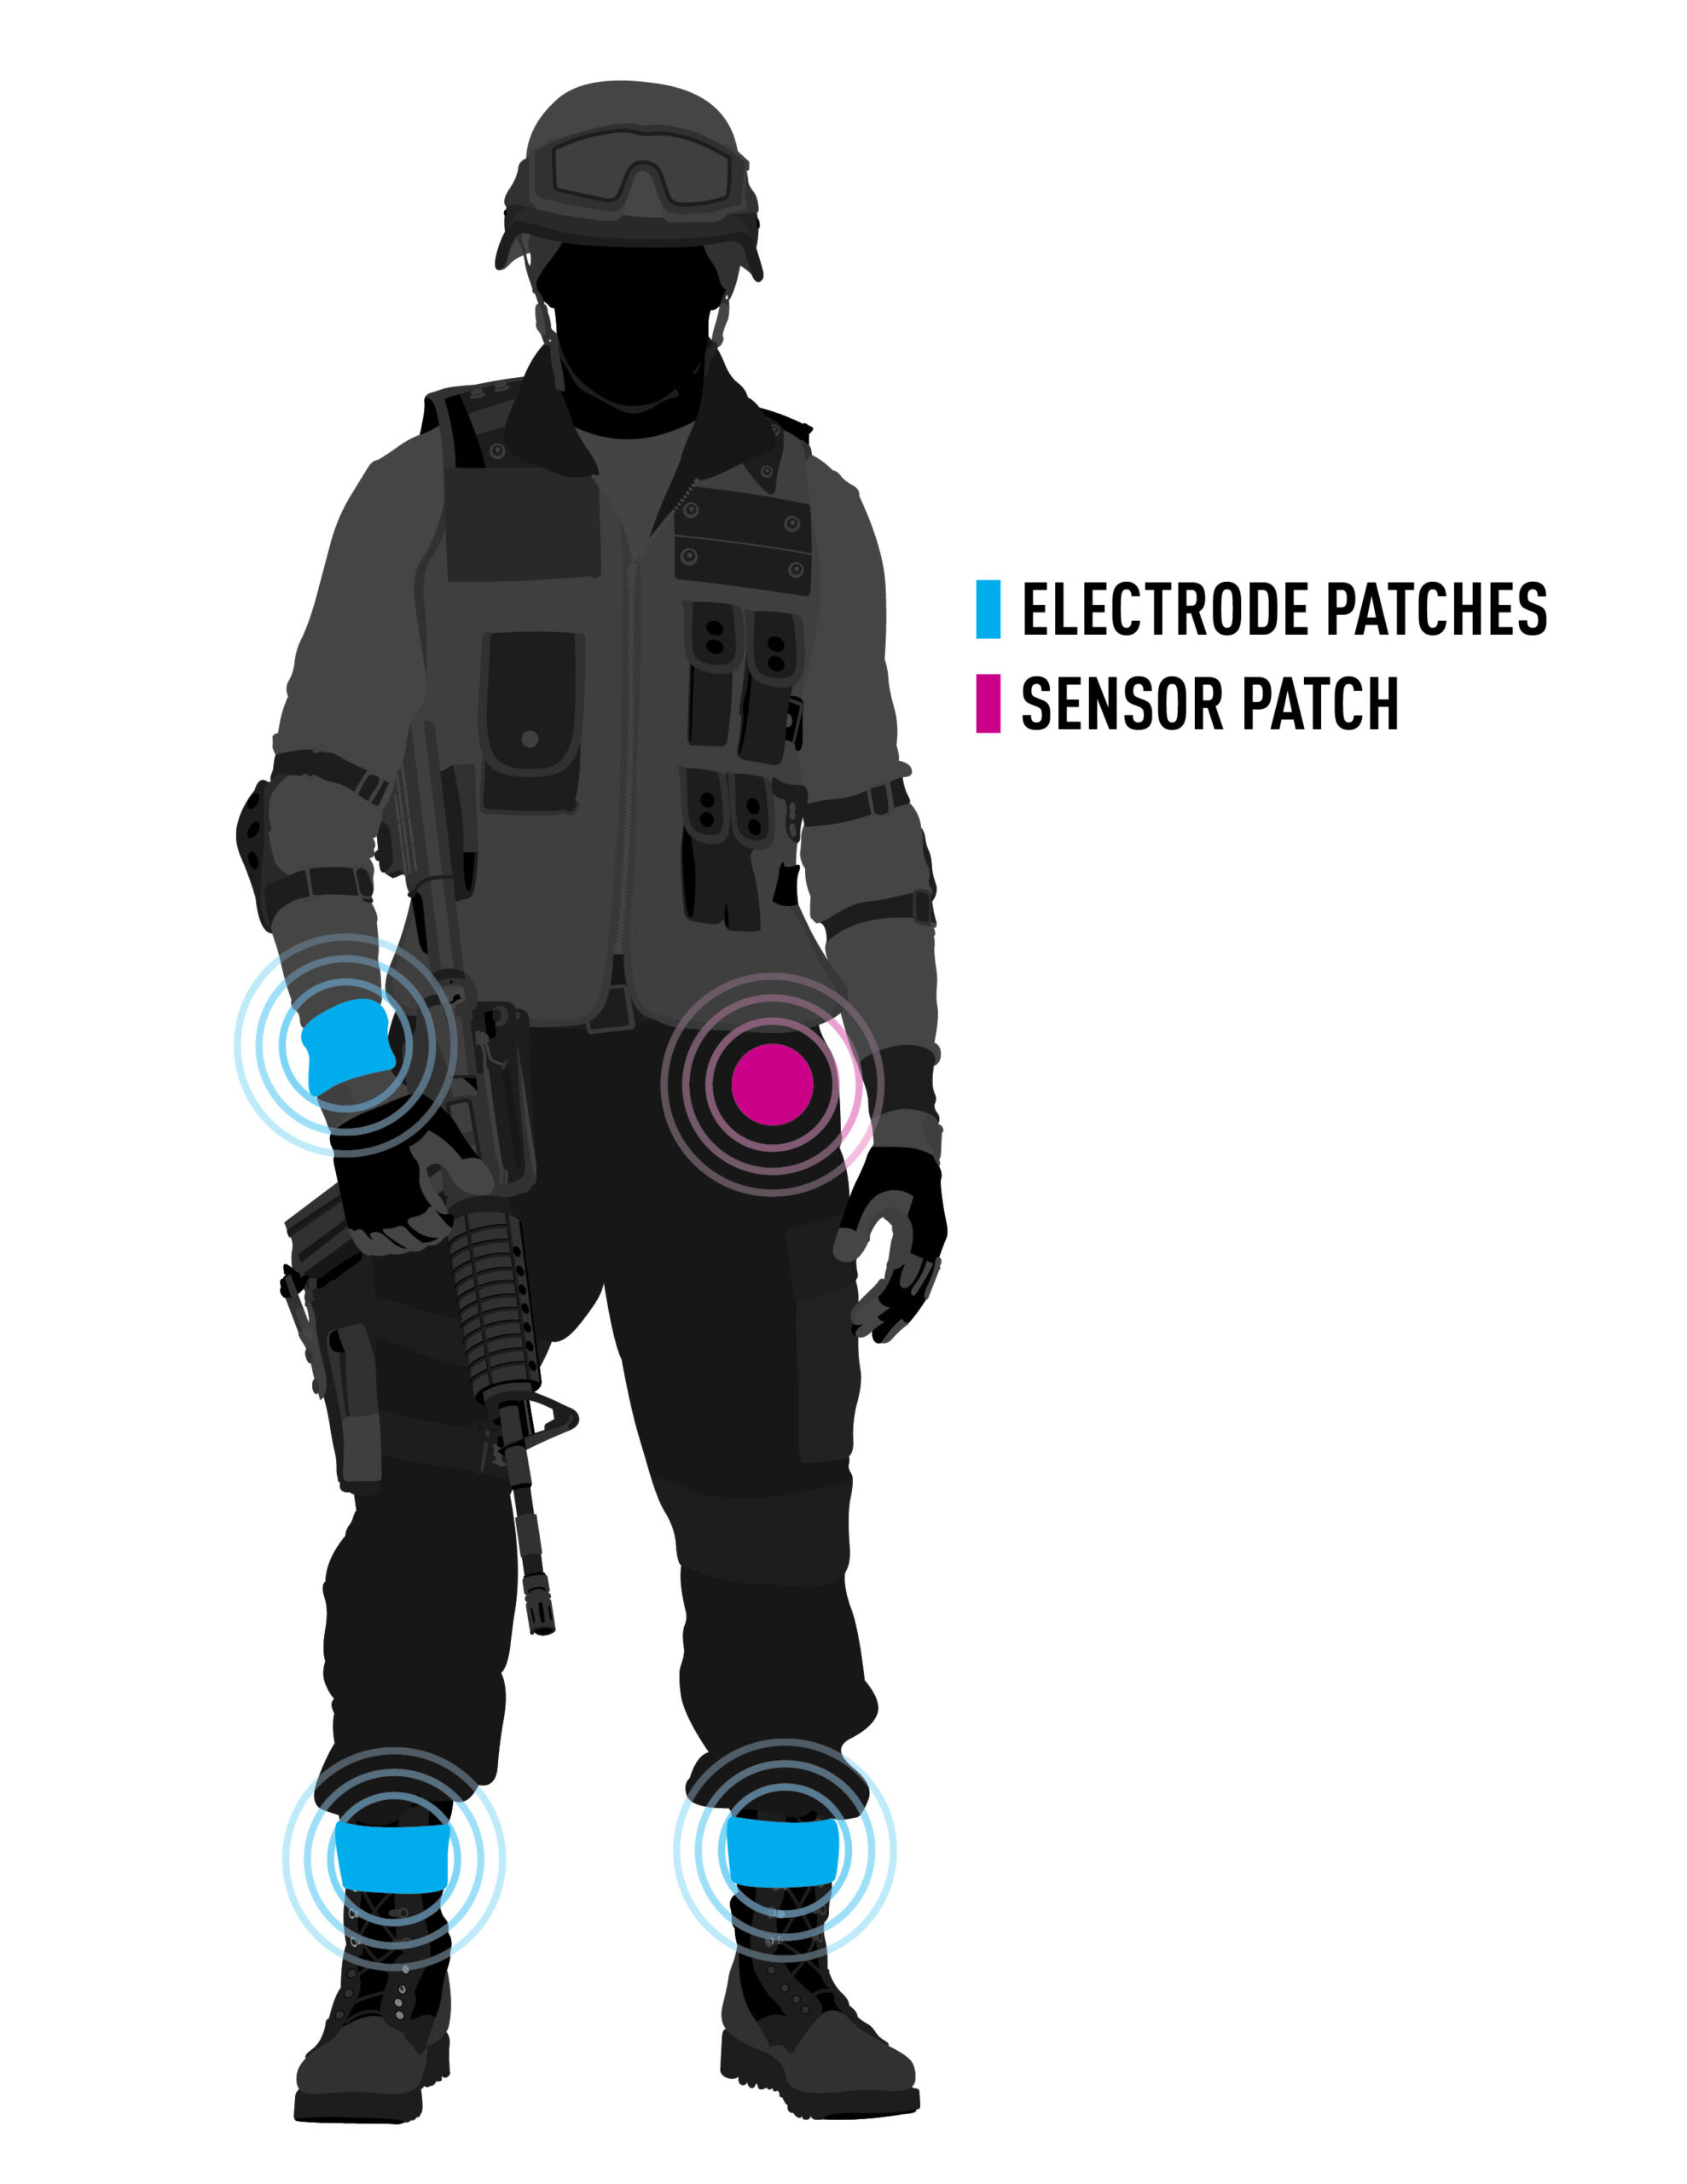 Electrode/patch system monitors physical & mental health of soldiers